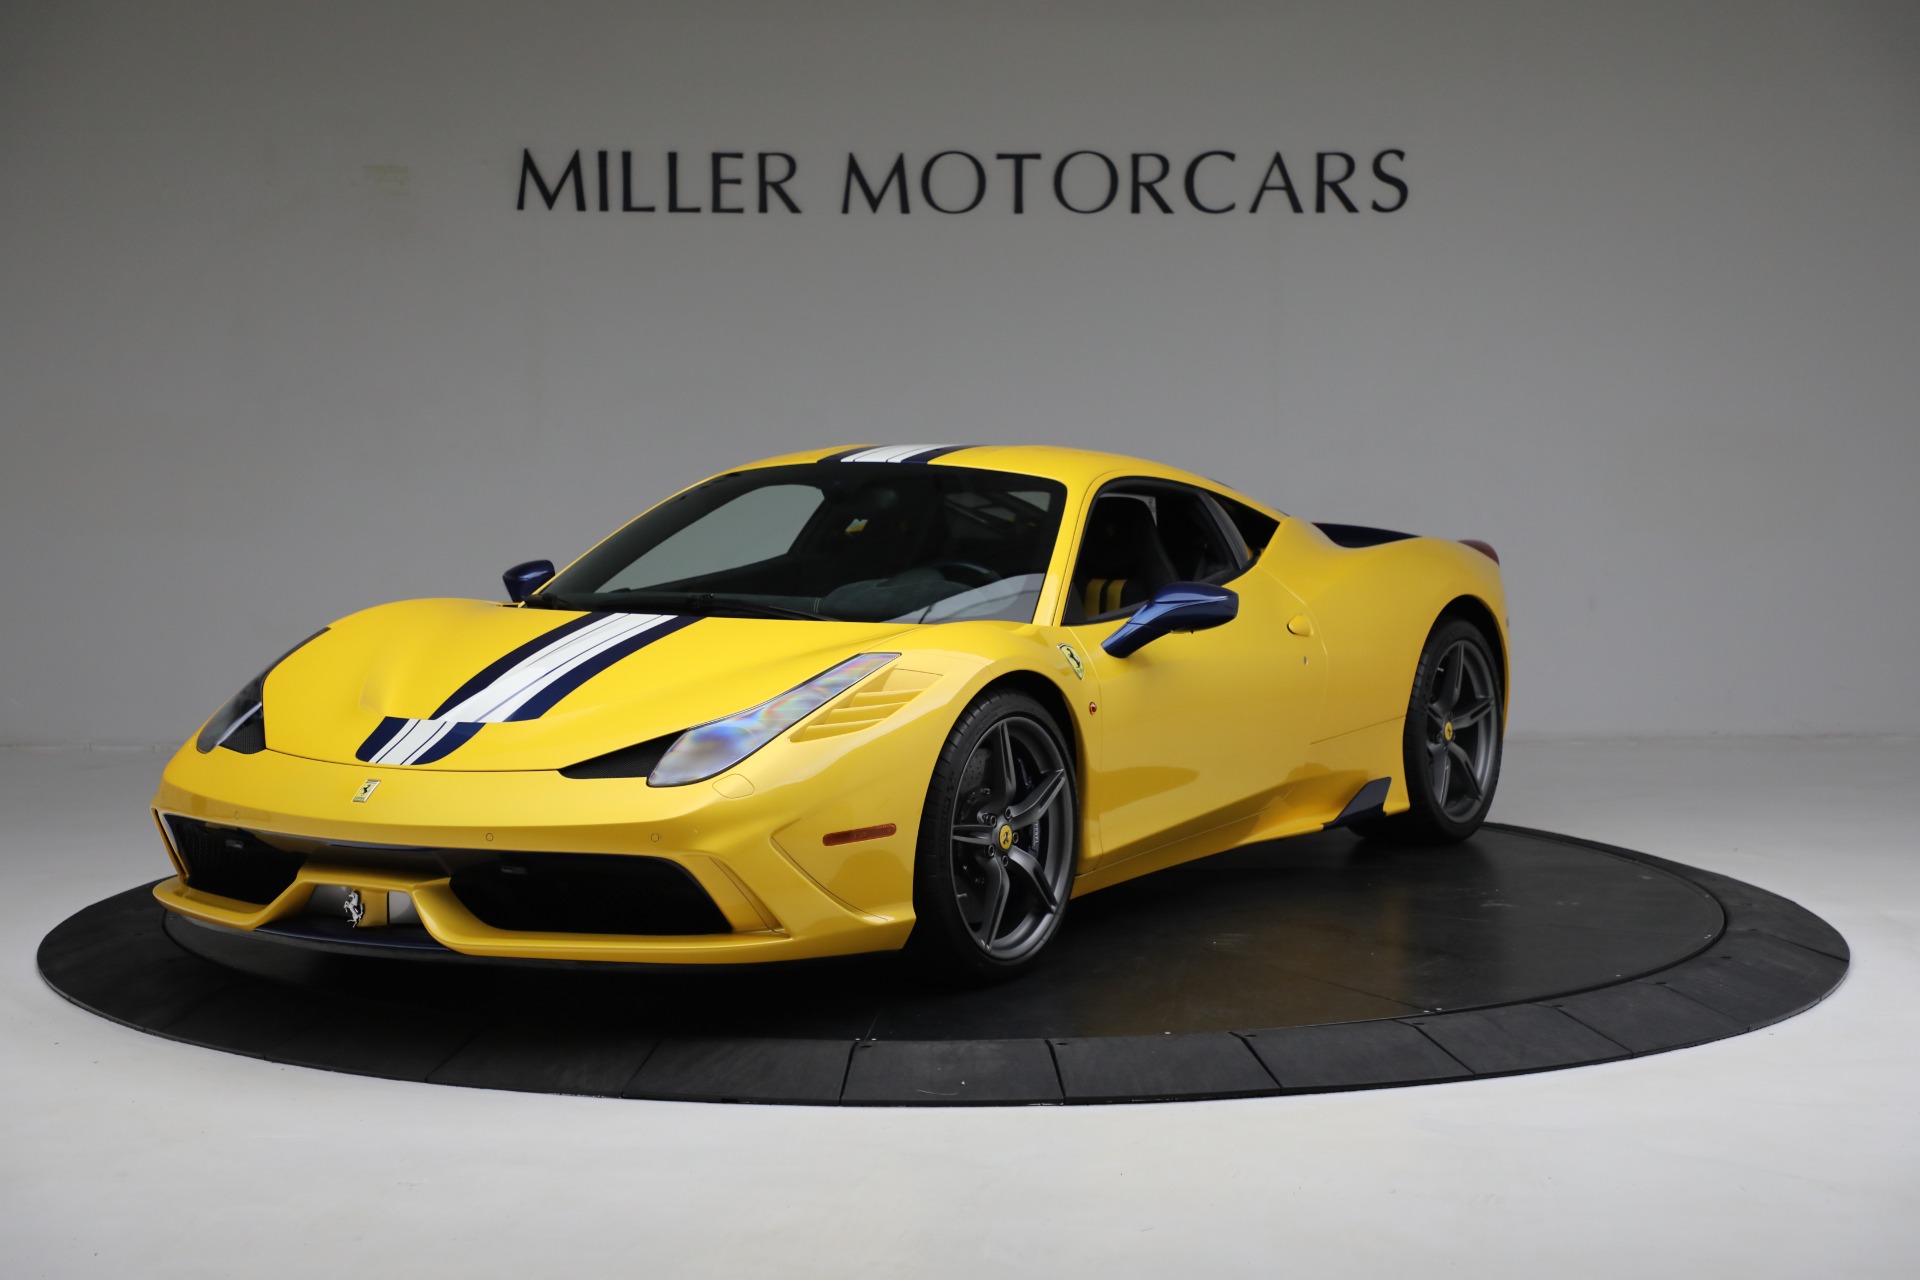 Used 2015 Ferrari 458 Speciale for sale Sold at Aston Martin of Greenwich in Greenwich CT 06830 1